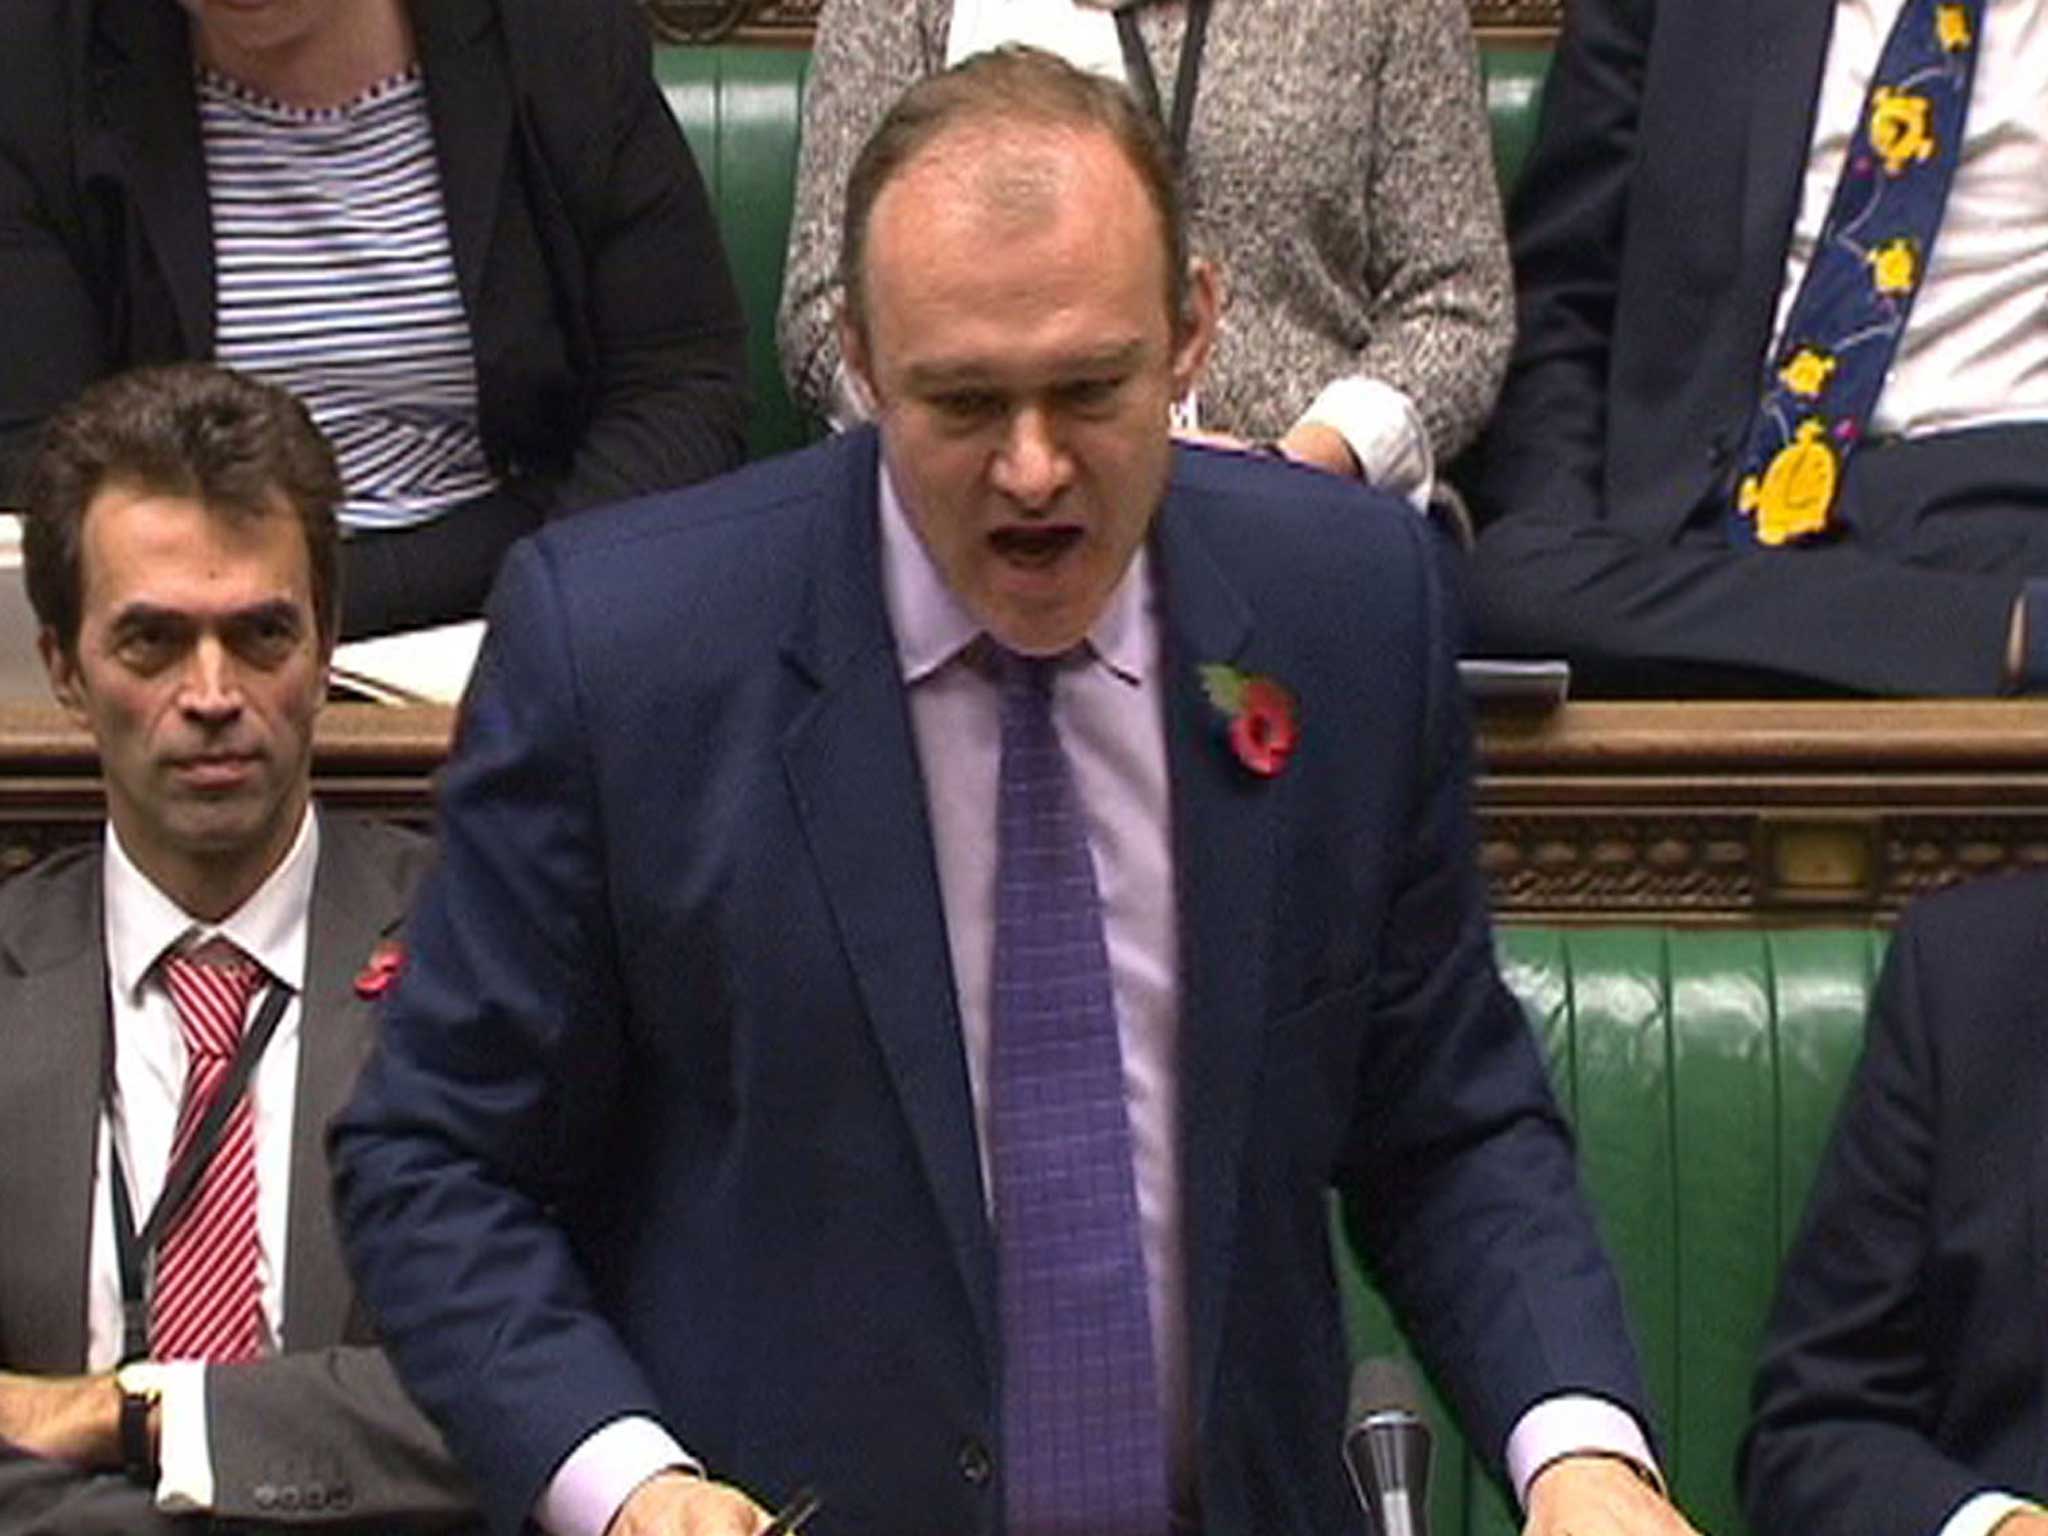 Ed Davey speaking in the House of Commons today